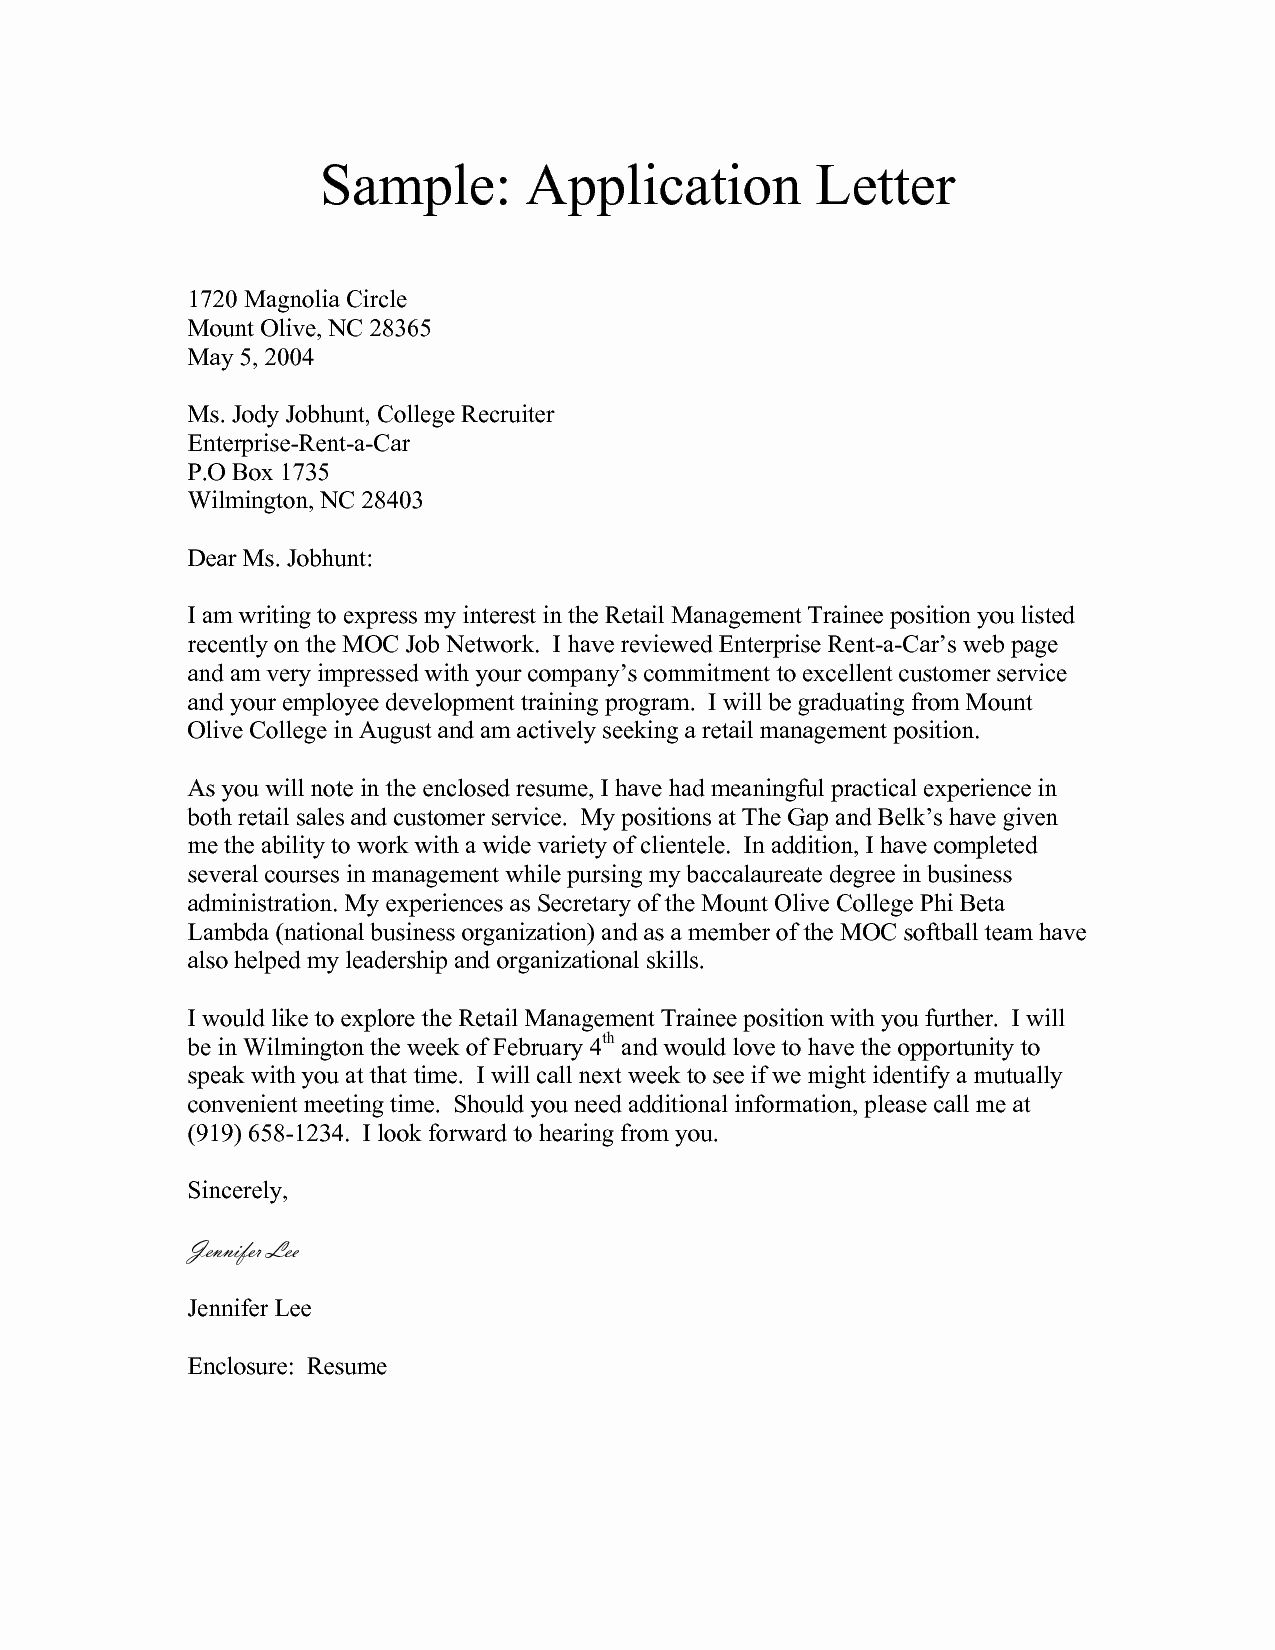 Letters Of Application Example New Download Free Application Letters